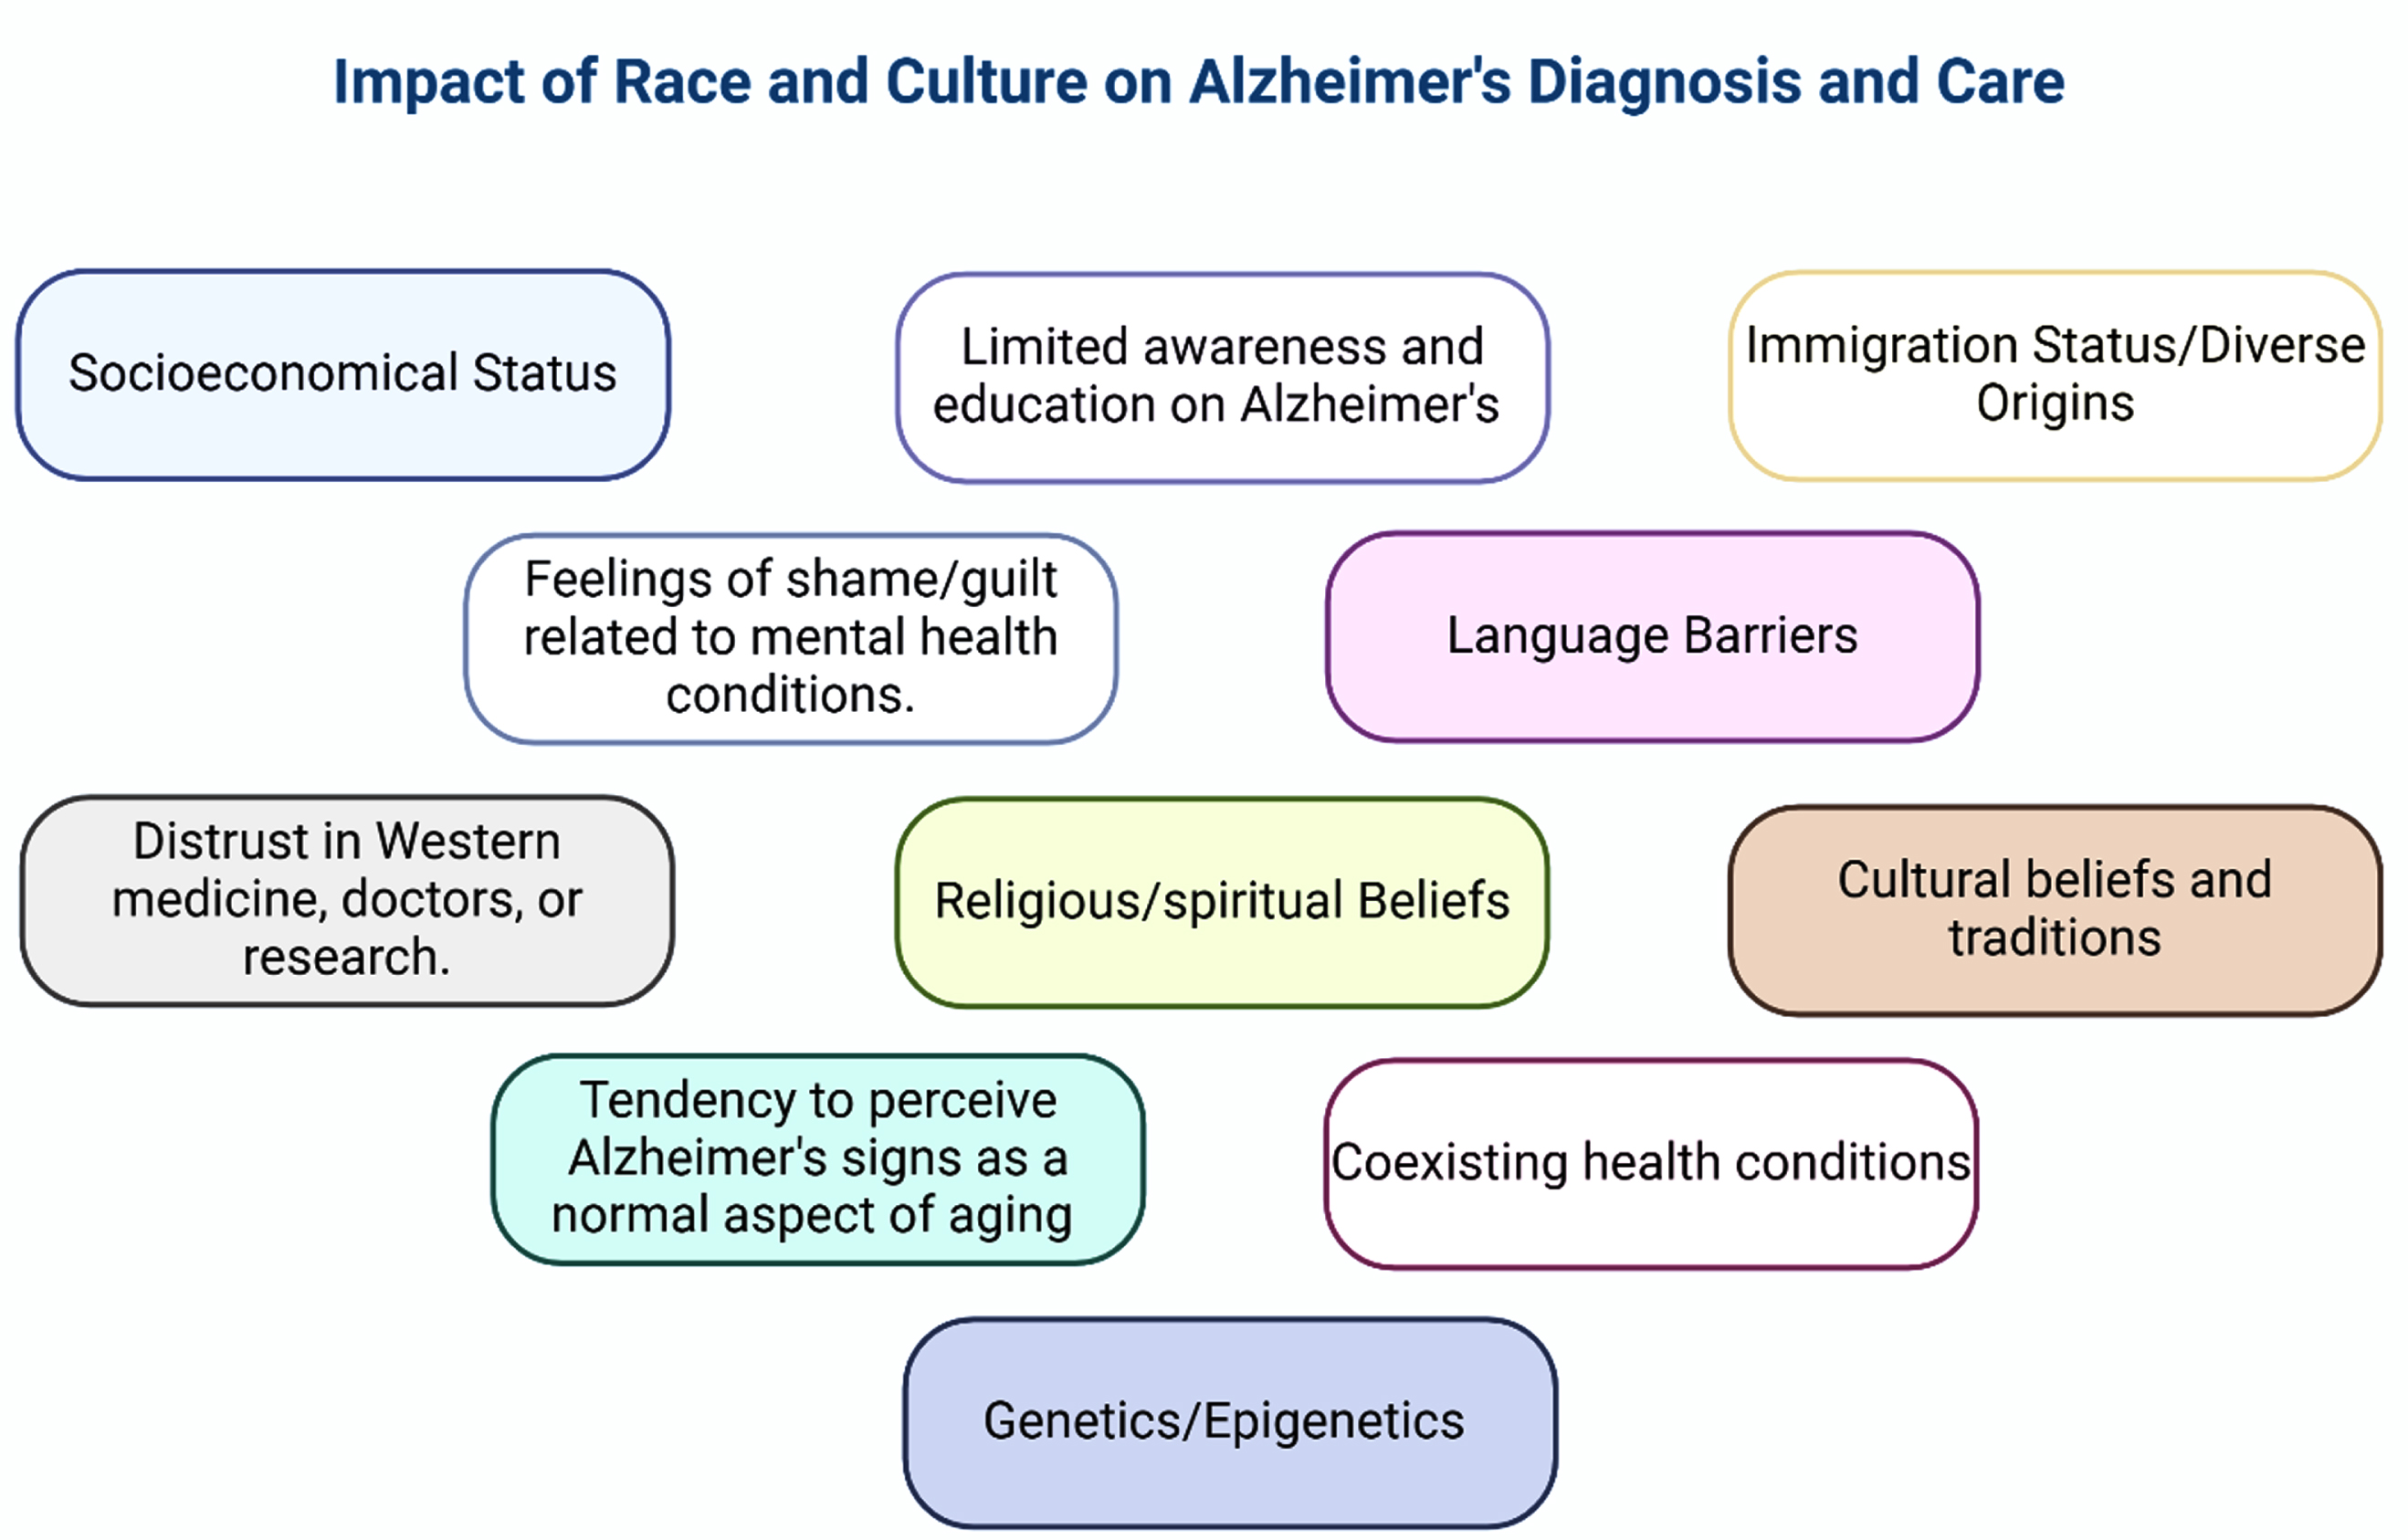 Impact of race, culture, and ethnicity on dementia diagnosis and care. Cultural and racial beliefs about dementia vary widely, shaped by factors like viewing signs as normal aging, limited awareness of mental health conditions, socioeconomic status, immigration status, shame and guilt, language barriers, distrust in Western medicine, comorbidities, cultural beliefs, hesitancy in seeking medical help, genetics, and epigenetics, seeking support from religious leaders, and using religion or prayer to cope with caregiving stress.